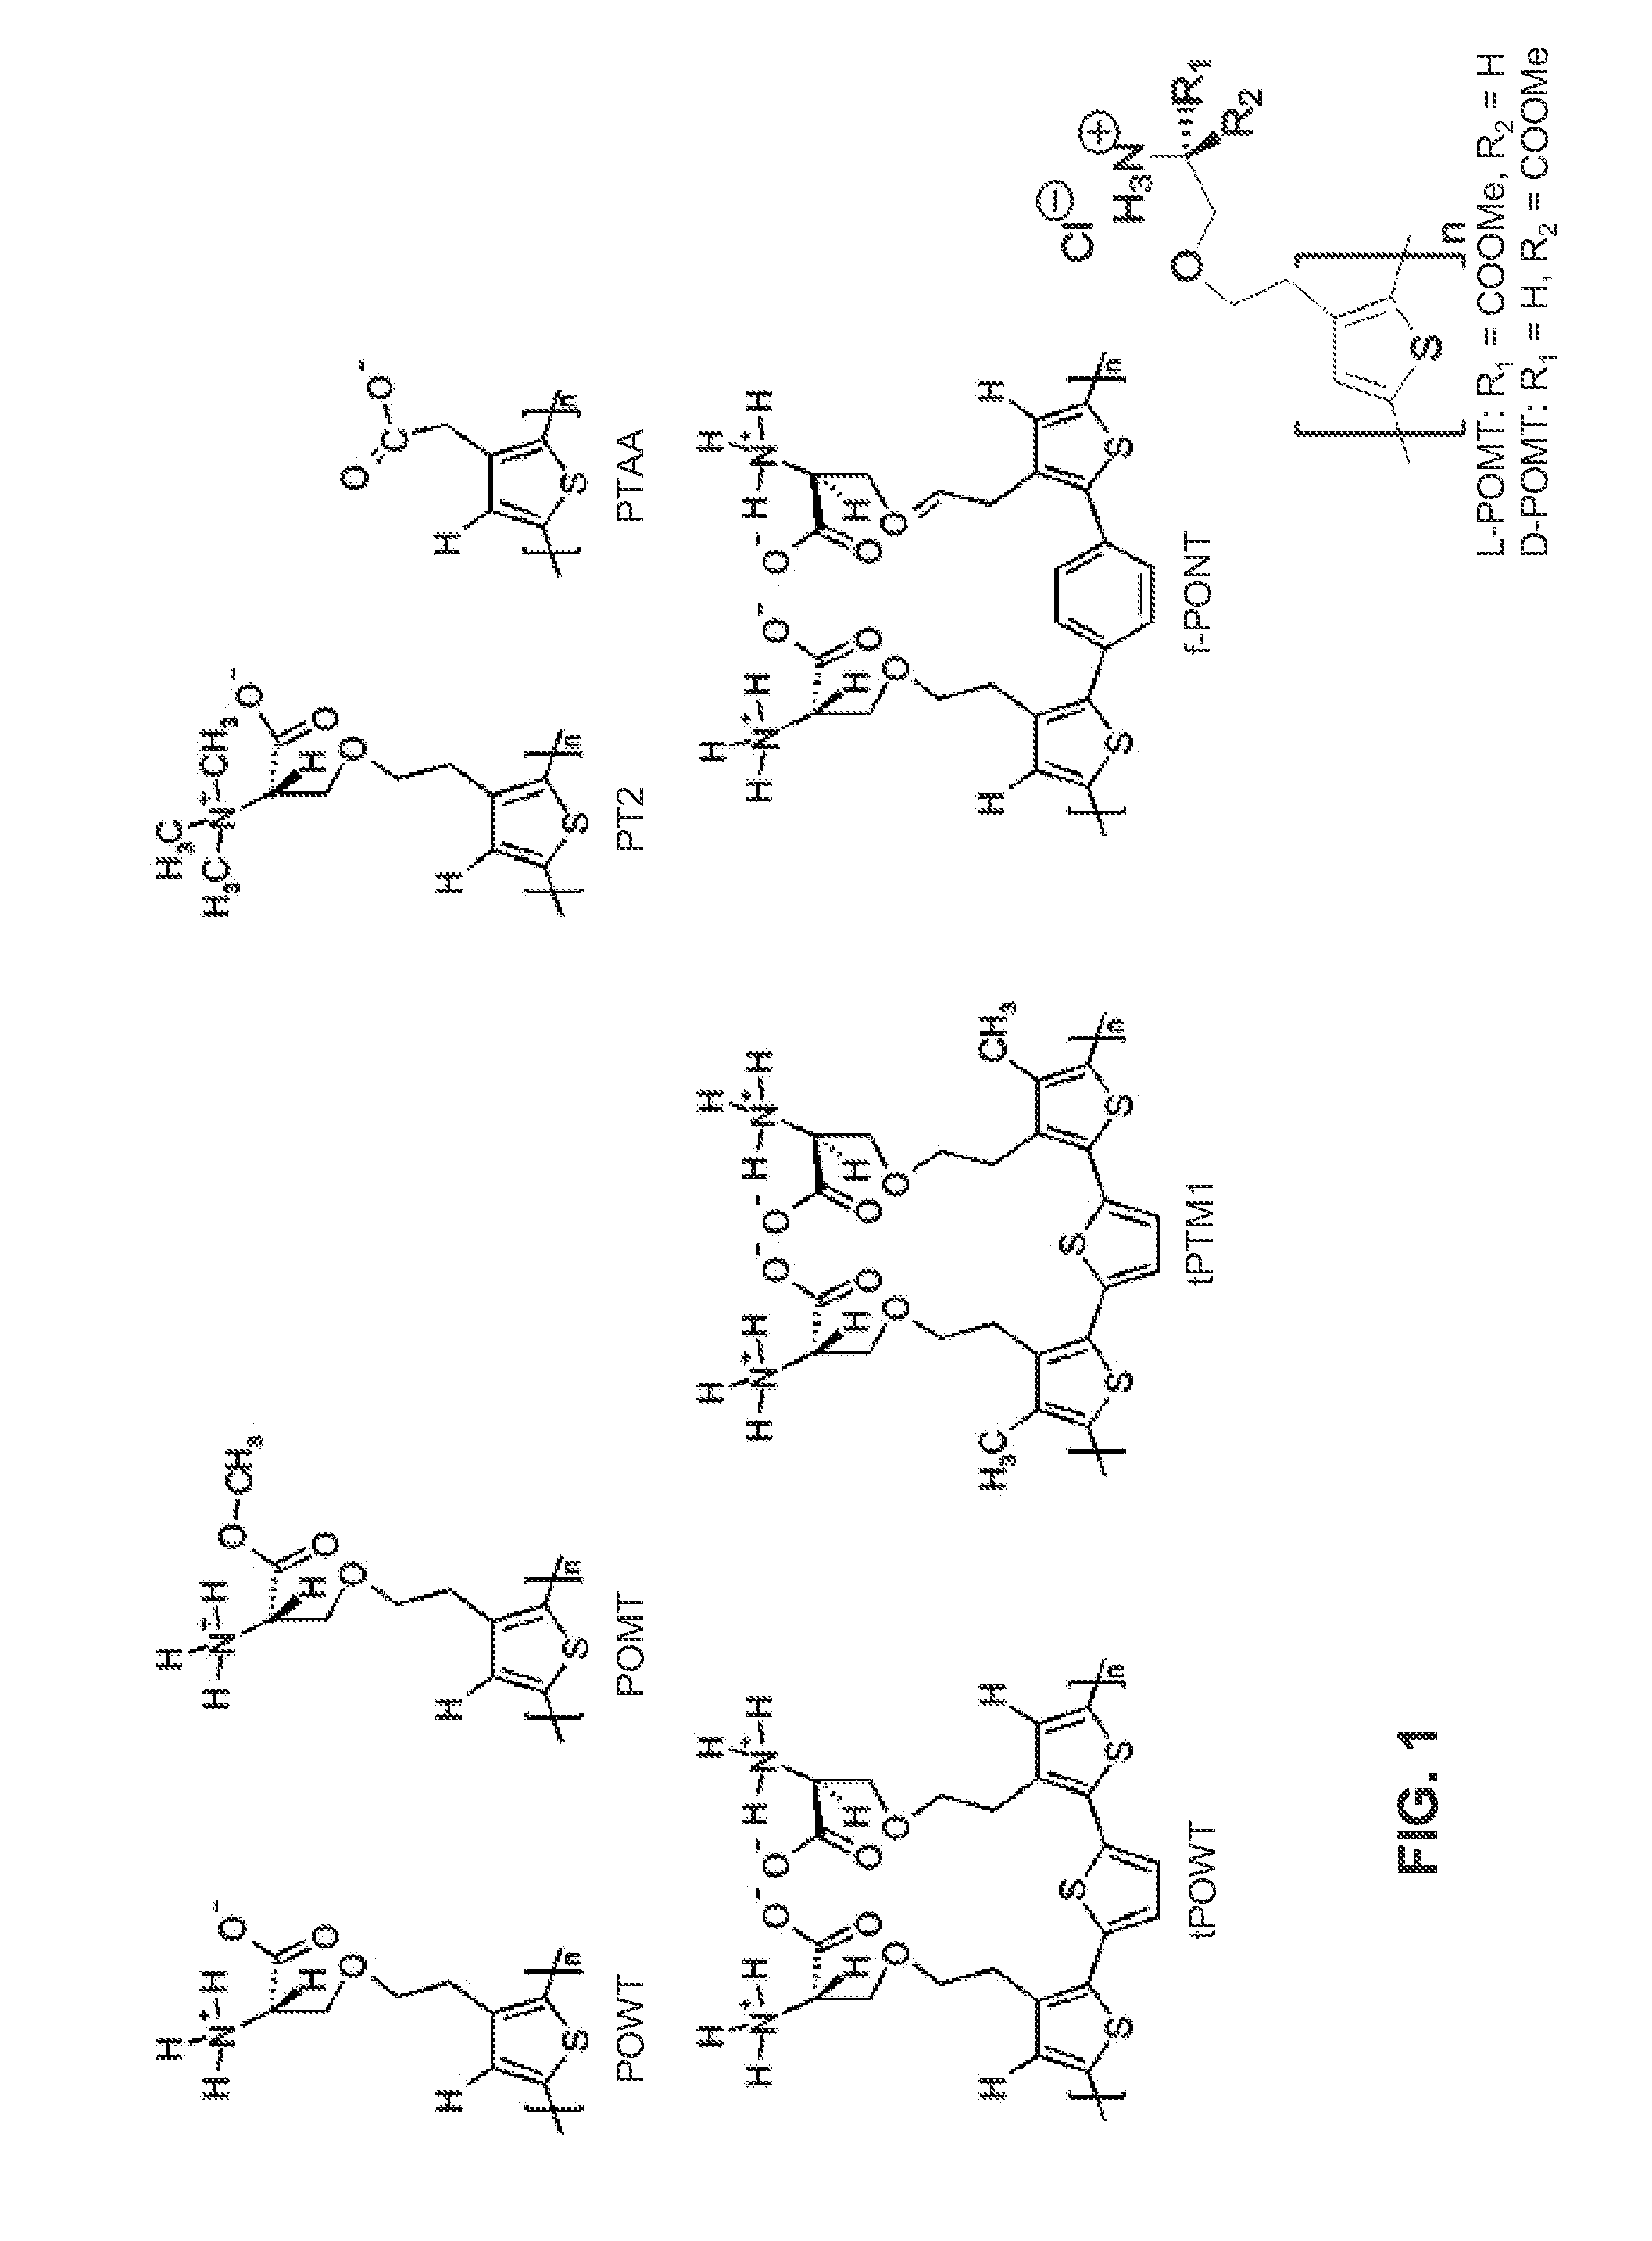 Binding of pathological forms of proteins using conjugated polyelectrolytes